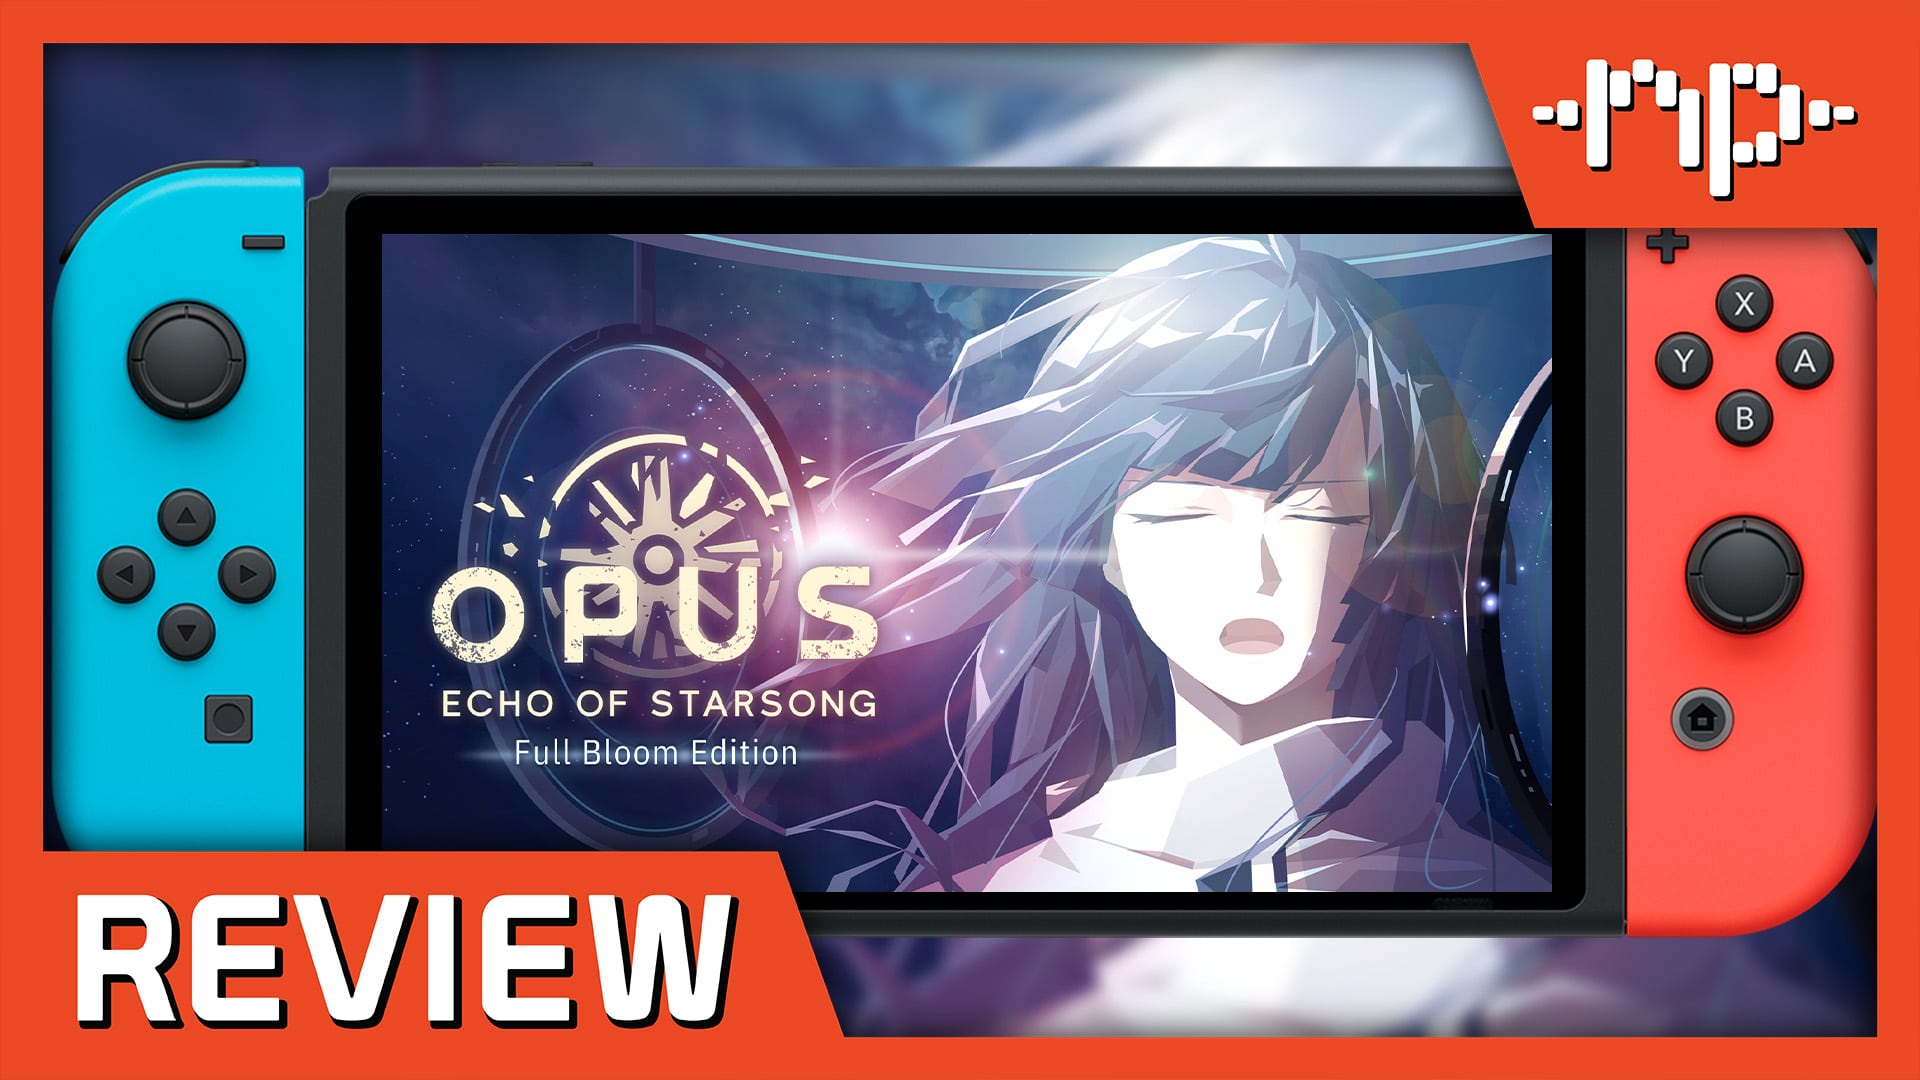 OPUS: Echo of Starsong Now Available on the Epic Games Store